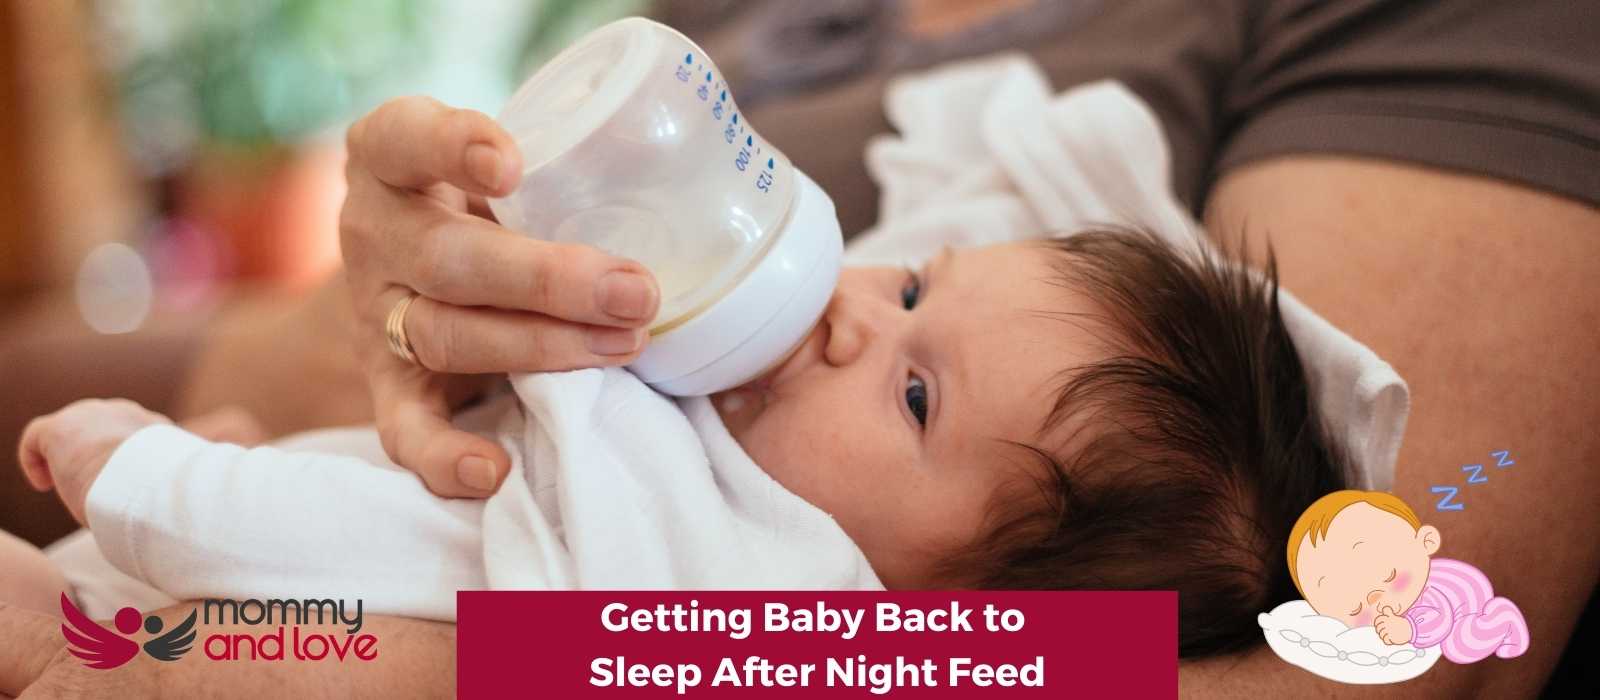 Getting Baby Back to Sleep After Night Feed